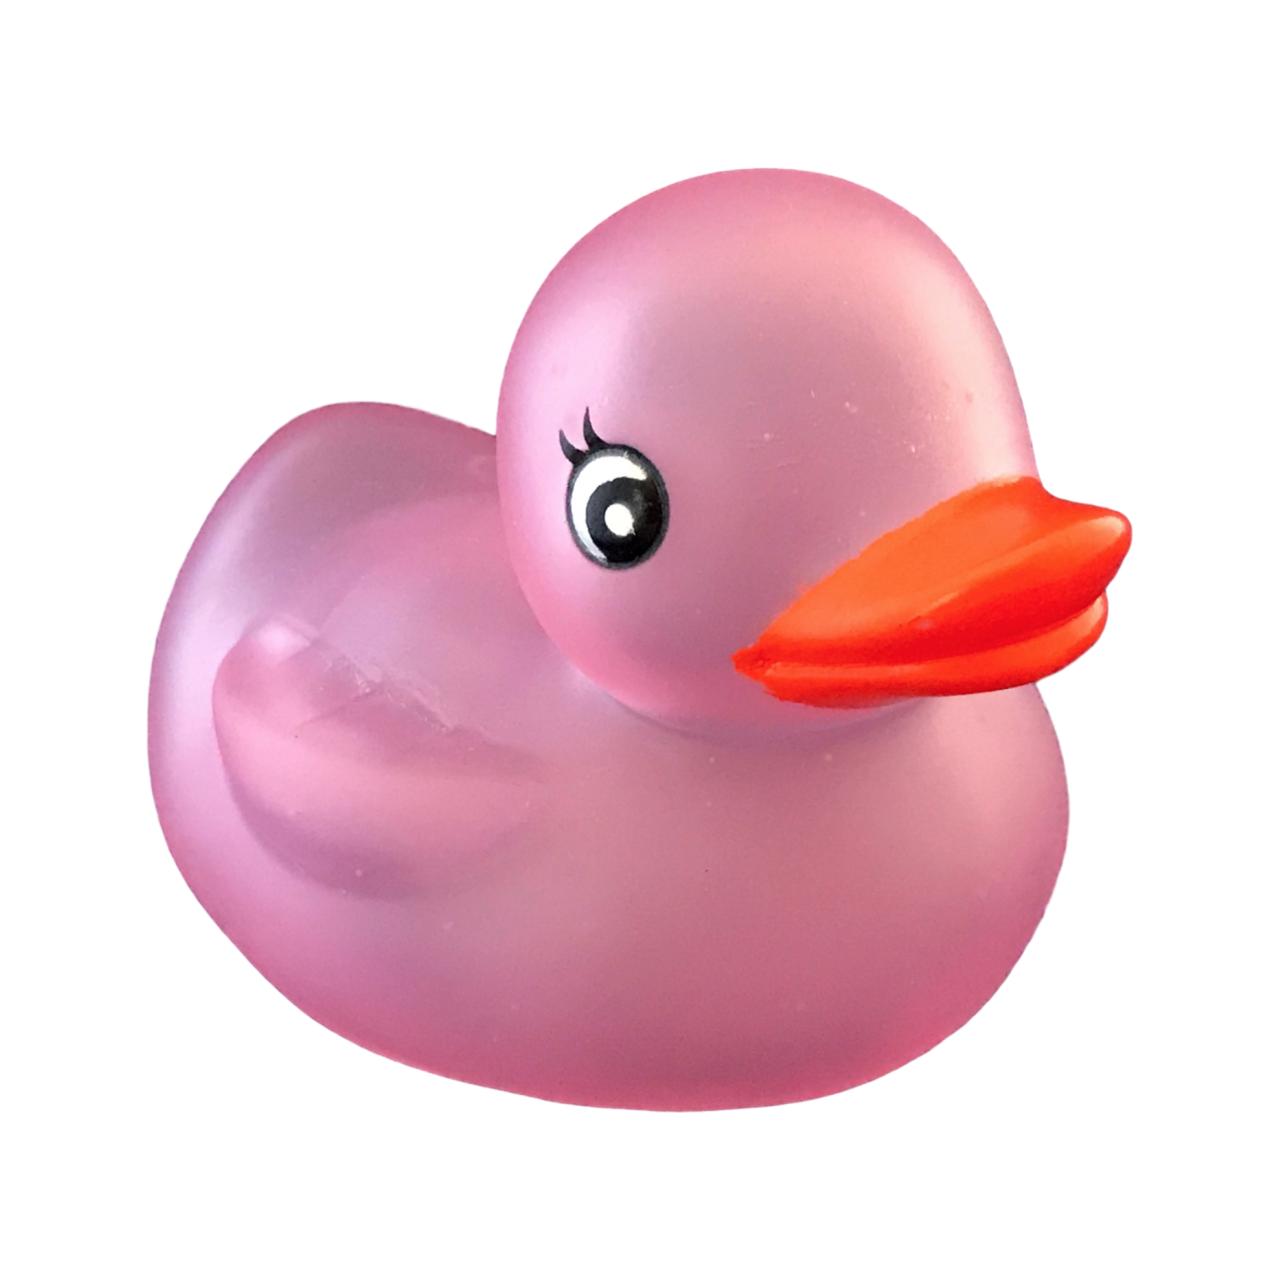 Squeaky Colored Rubber Duck- Rubber Ducks for Sale In Bulk – DUCKY CITY